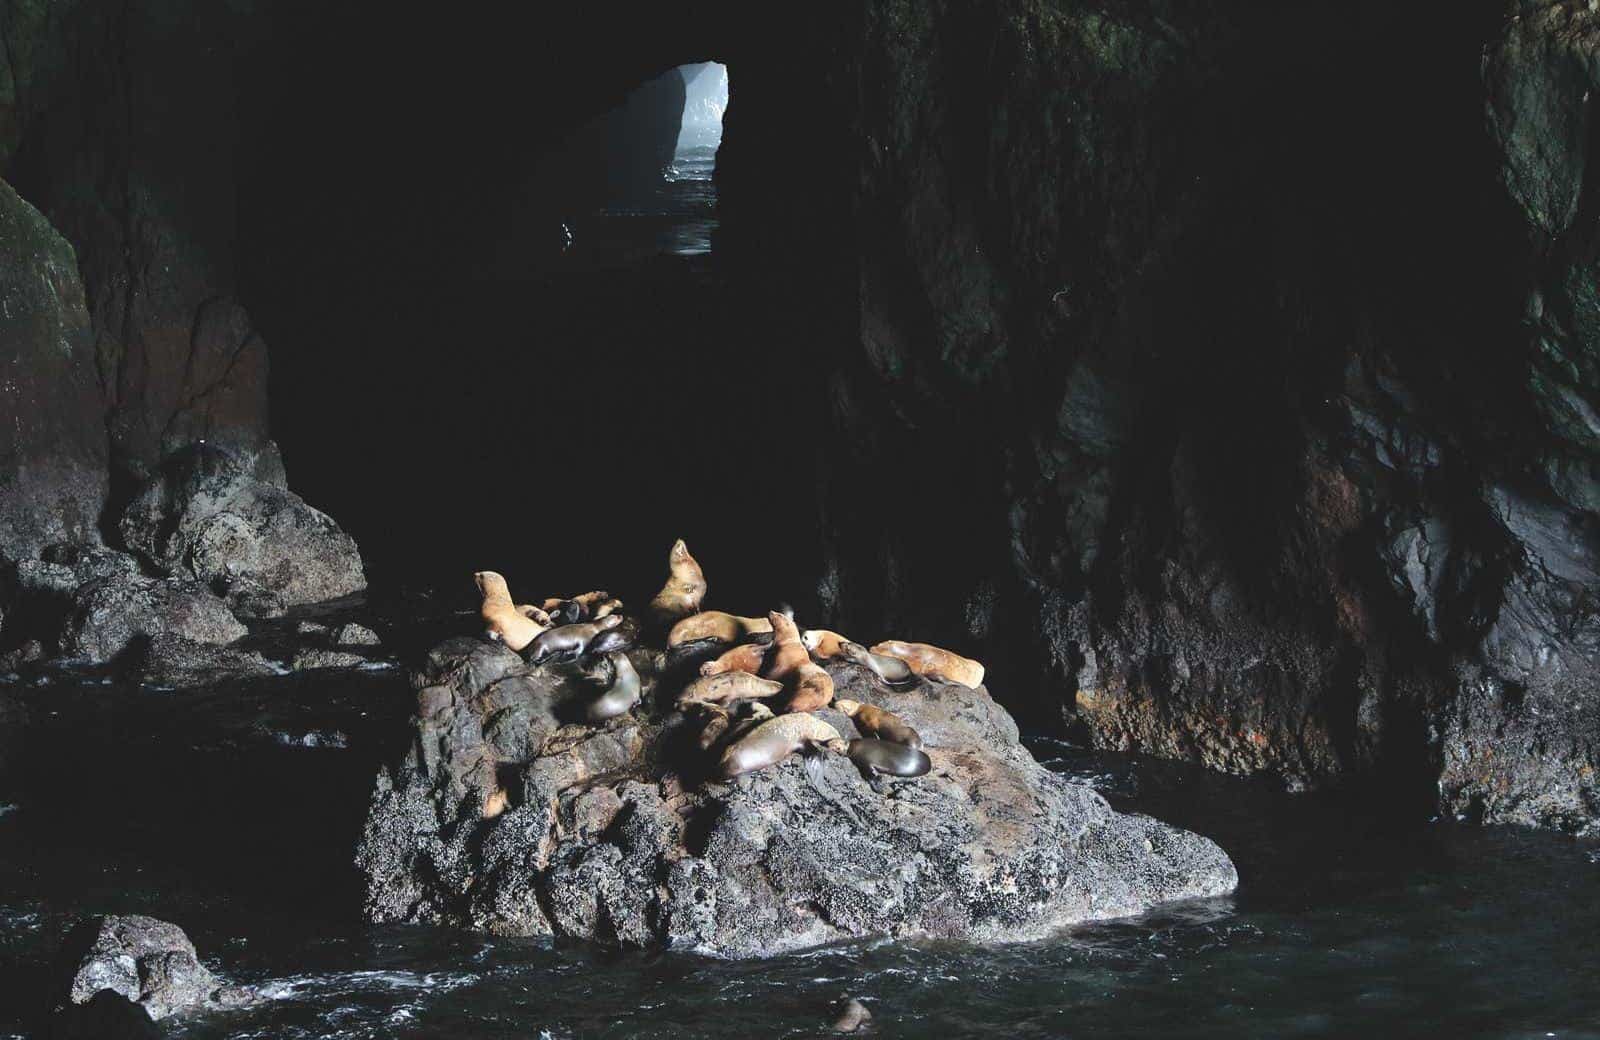 There are several amazing caves in Oregon including the Sea Lion Cave.